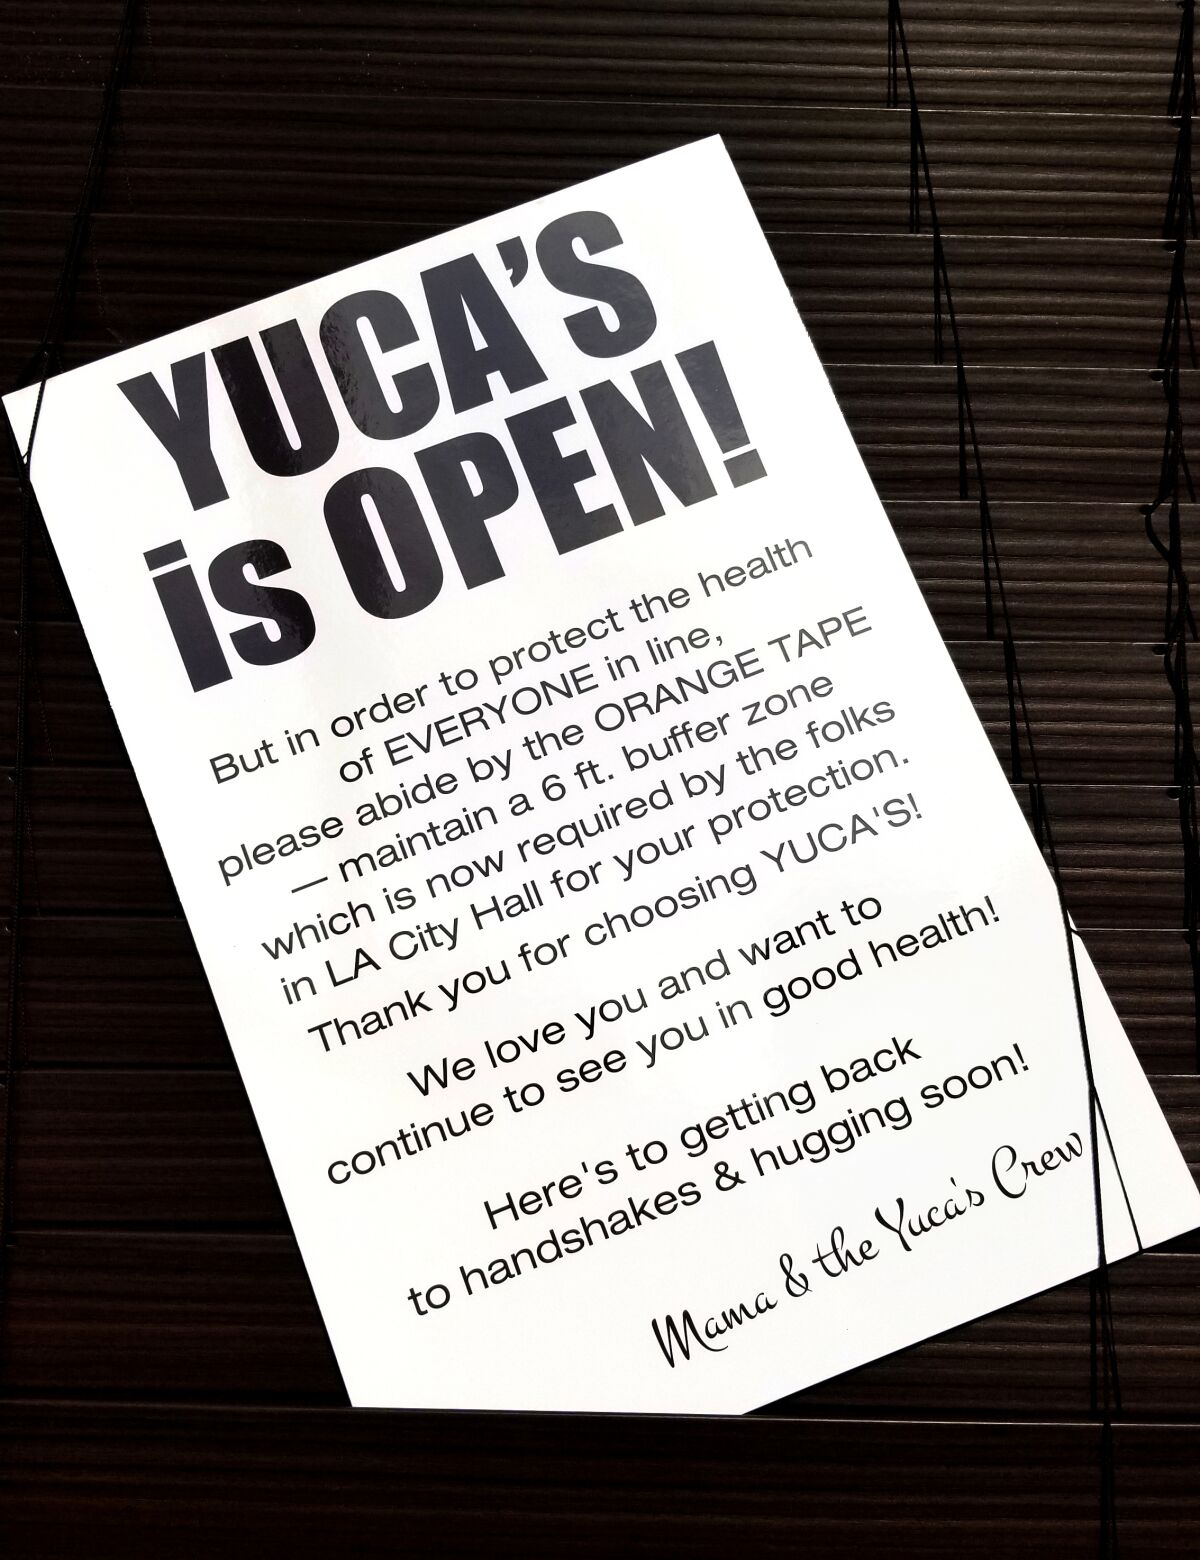 A sign says "Yuca's is Open!" 